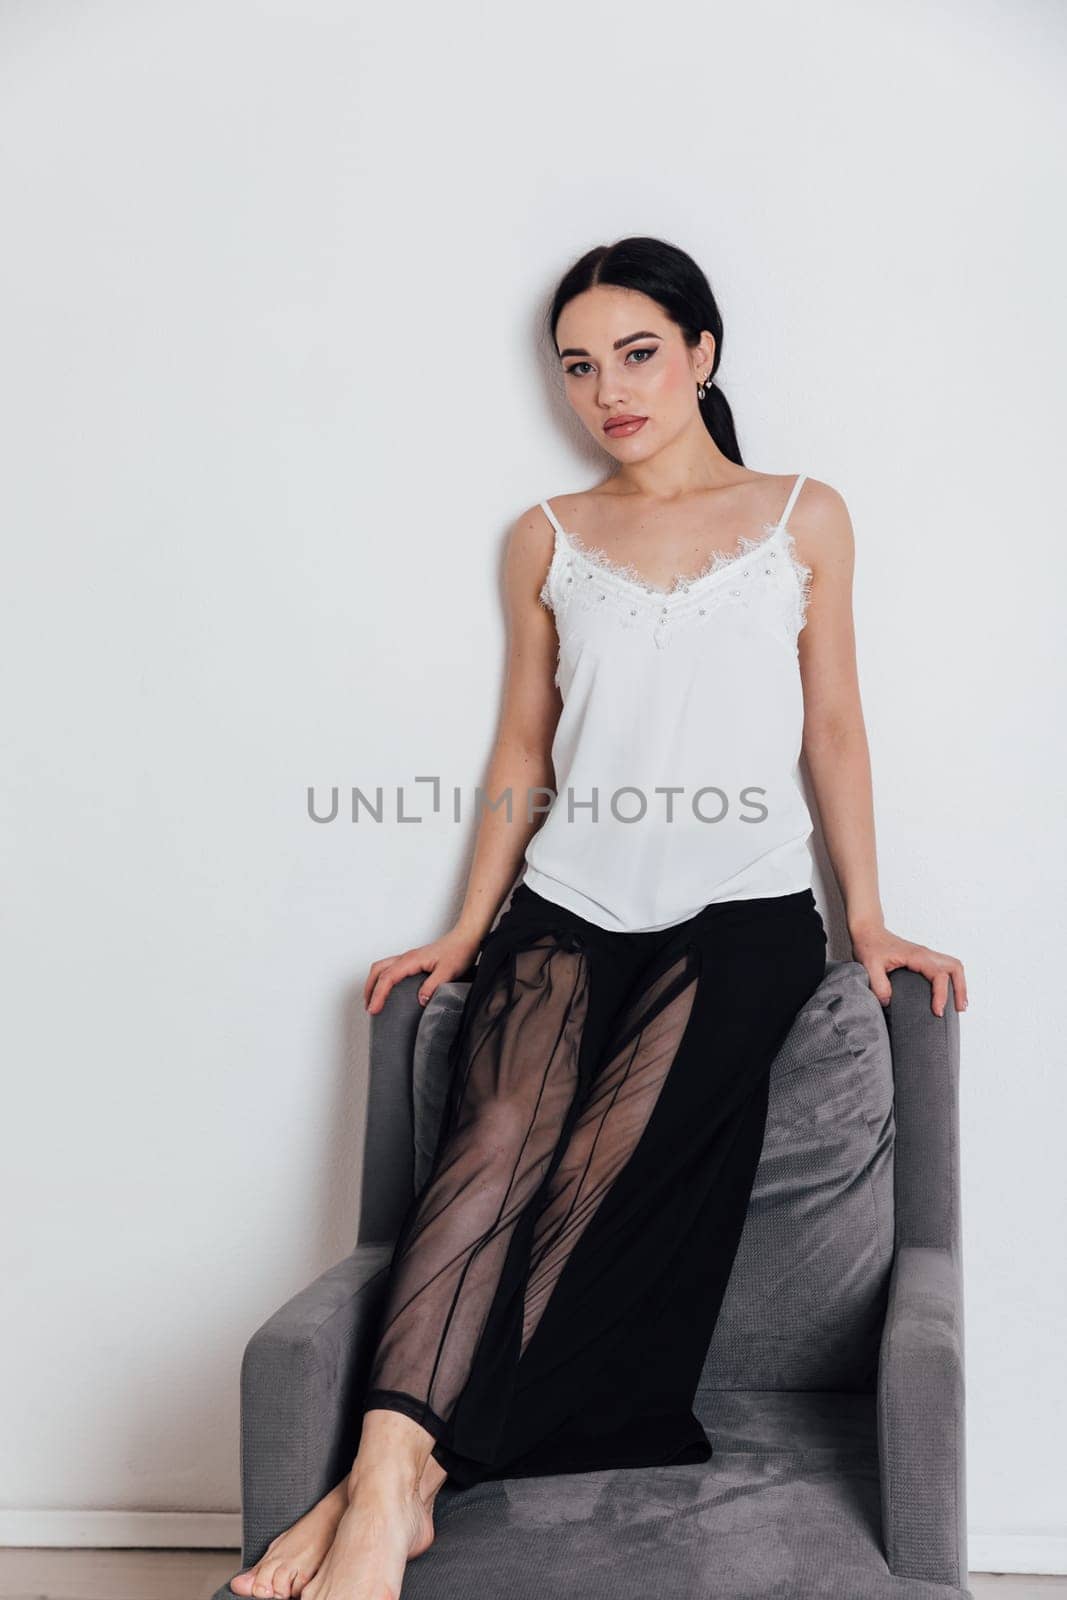 fashionable woman in black pants sits on a chair